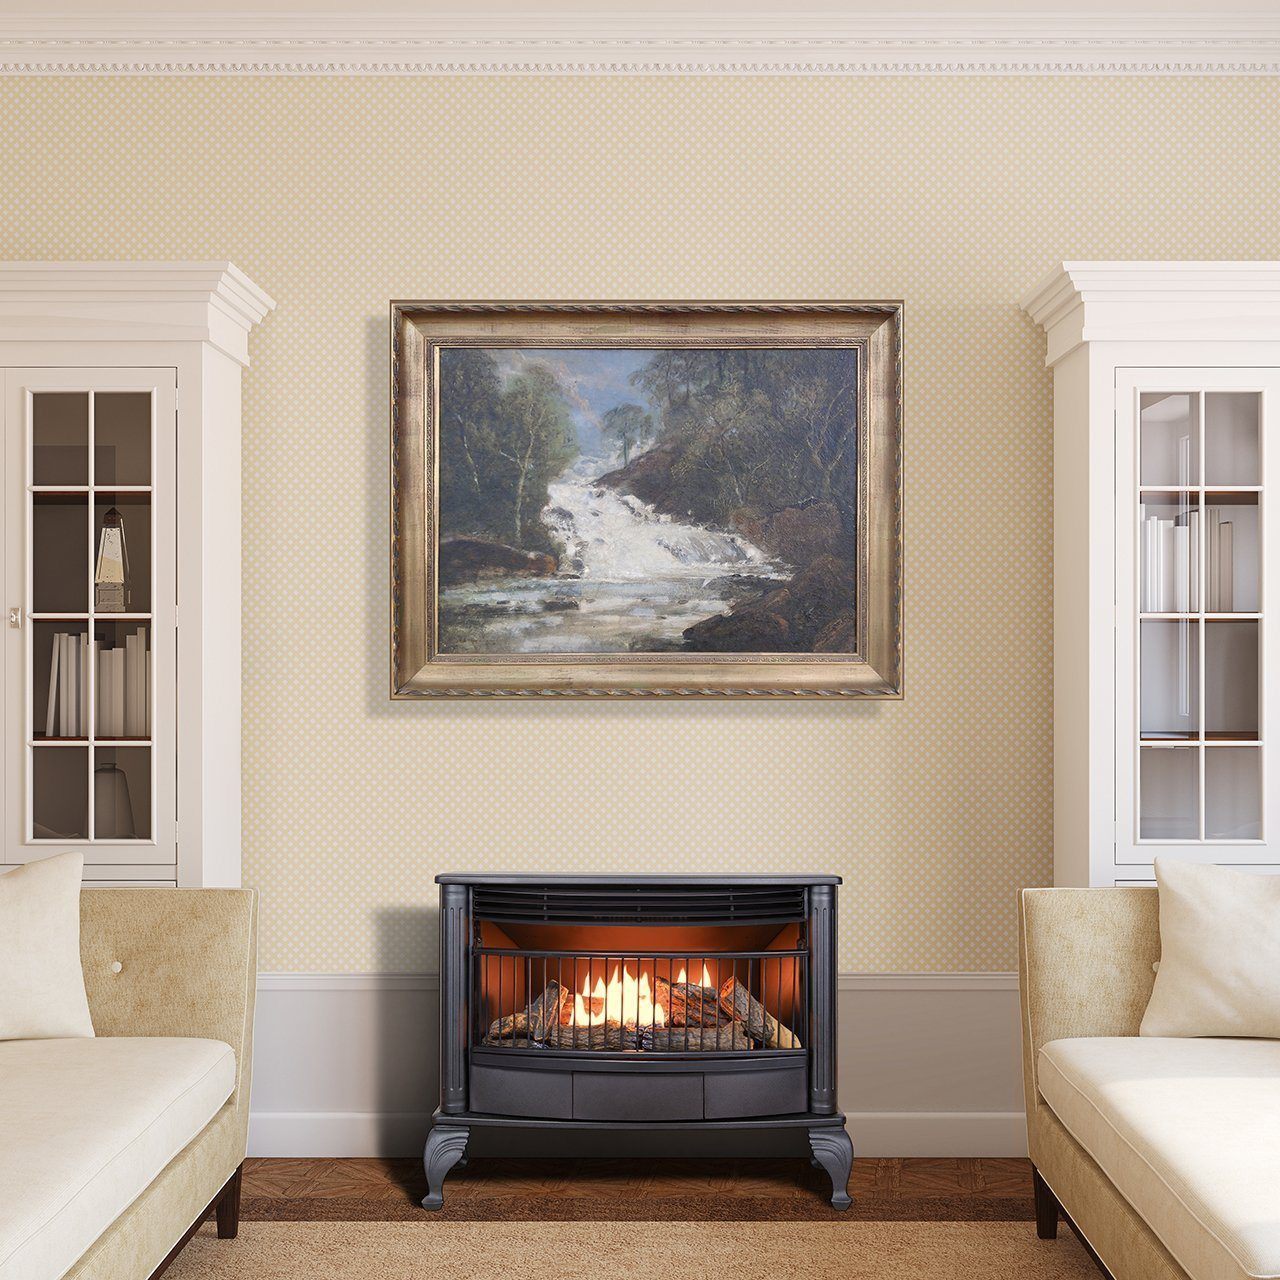 Looking for the best gas fireplace inserts? Before you buy